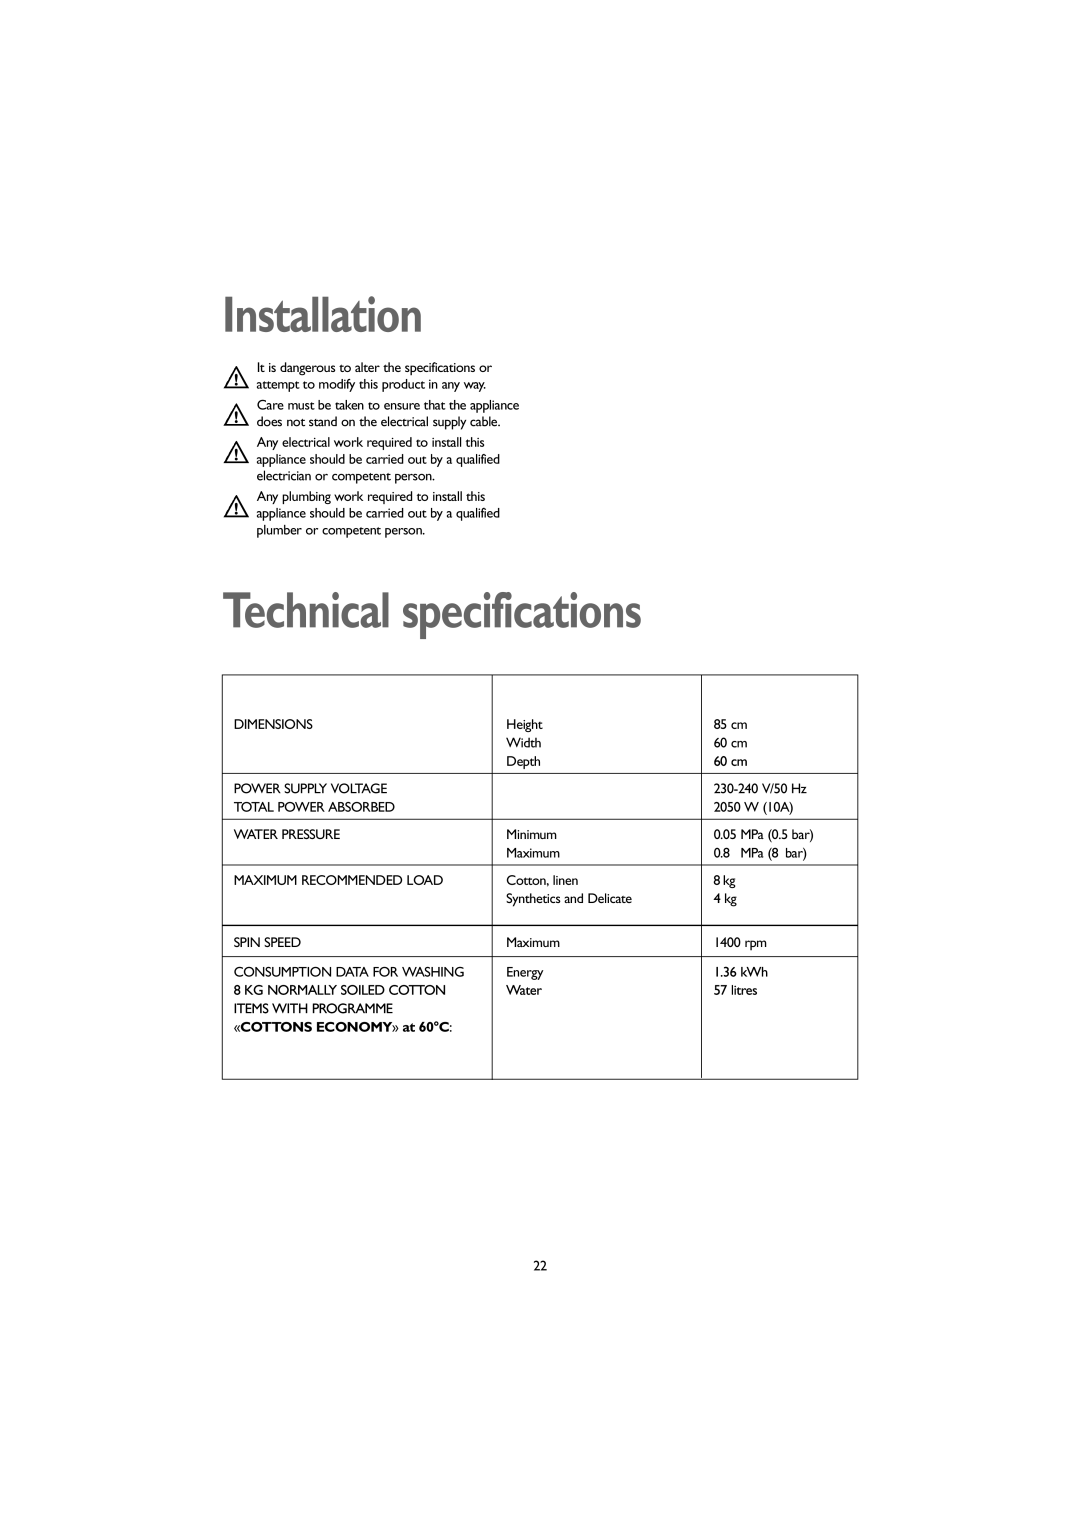 John Lewis JLWM 1406 instruction manual Installation, Technical specifications, «COTTONS ECONOMY» at 60C 